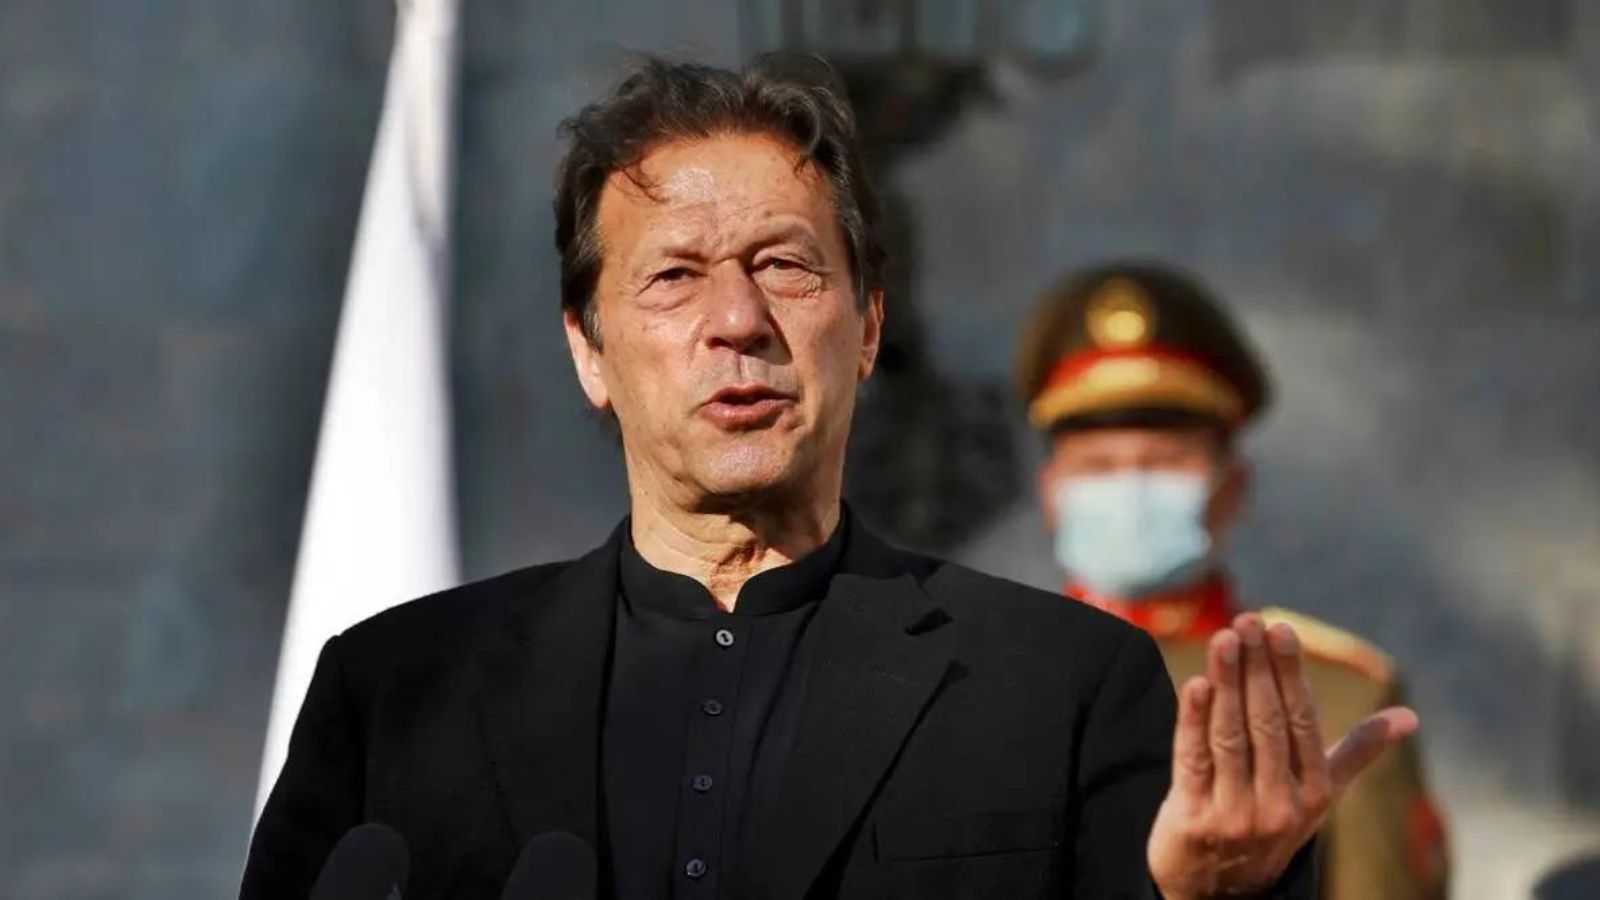 Imran Khan's party denies any secret negotiations with the powerful Pakistani government